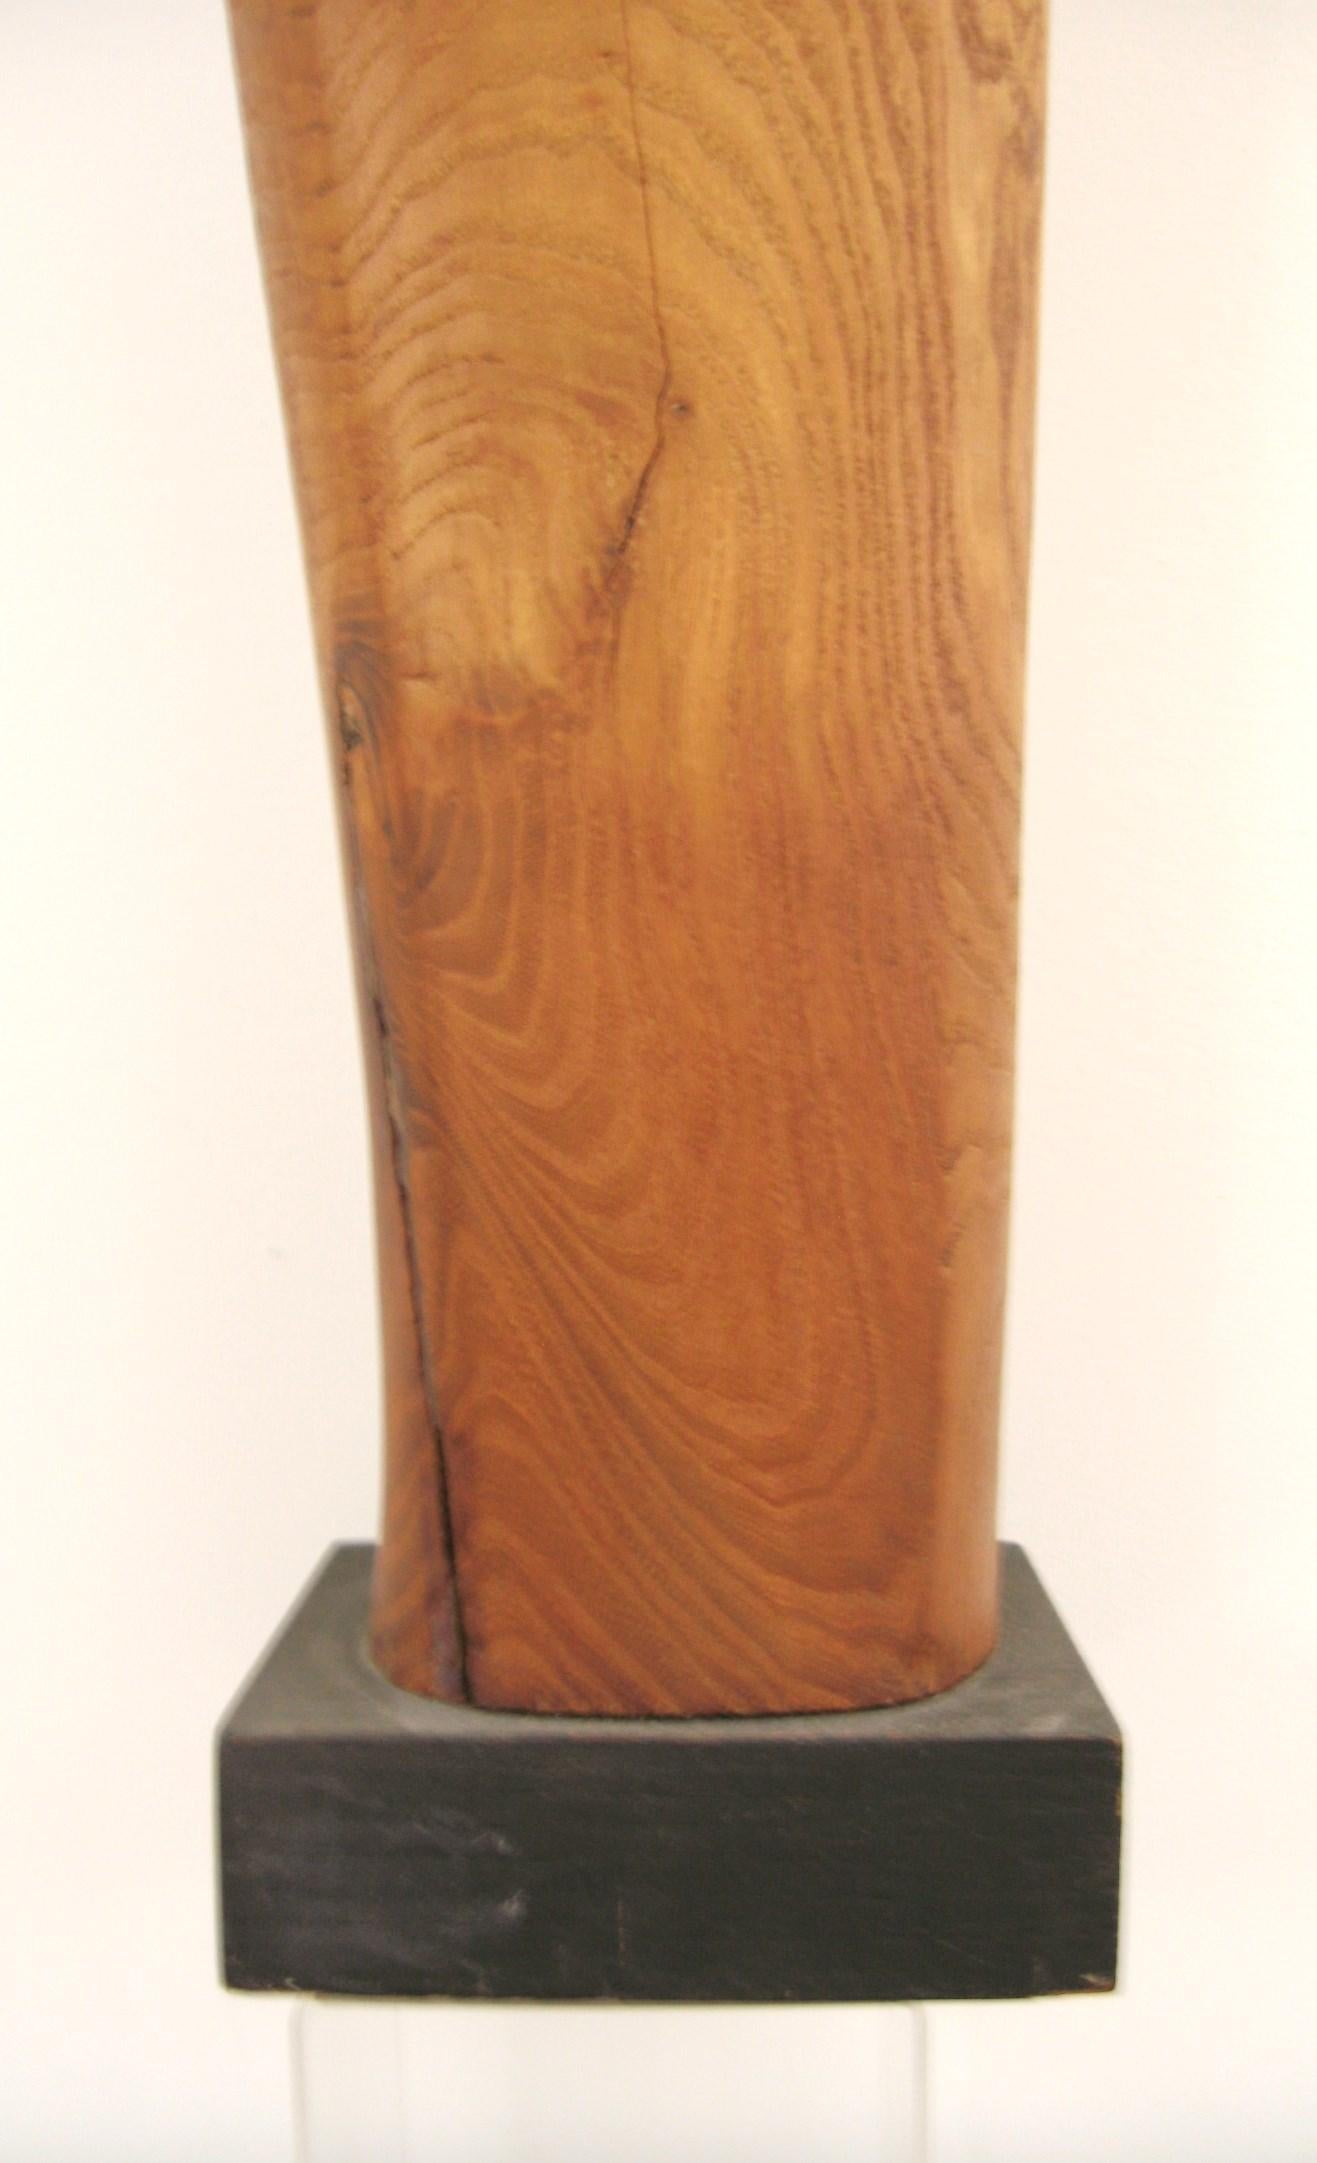 Mid-Century Modern figurative Mother of Mary sculpture. Hand carved wooden Figure of the Madonna. Sits atop a darker base. This hand carved and turned wooden sculpture shows exceptional artisan craftsmanship. This will be a great addition to your